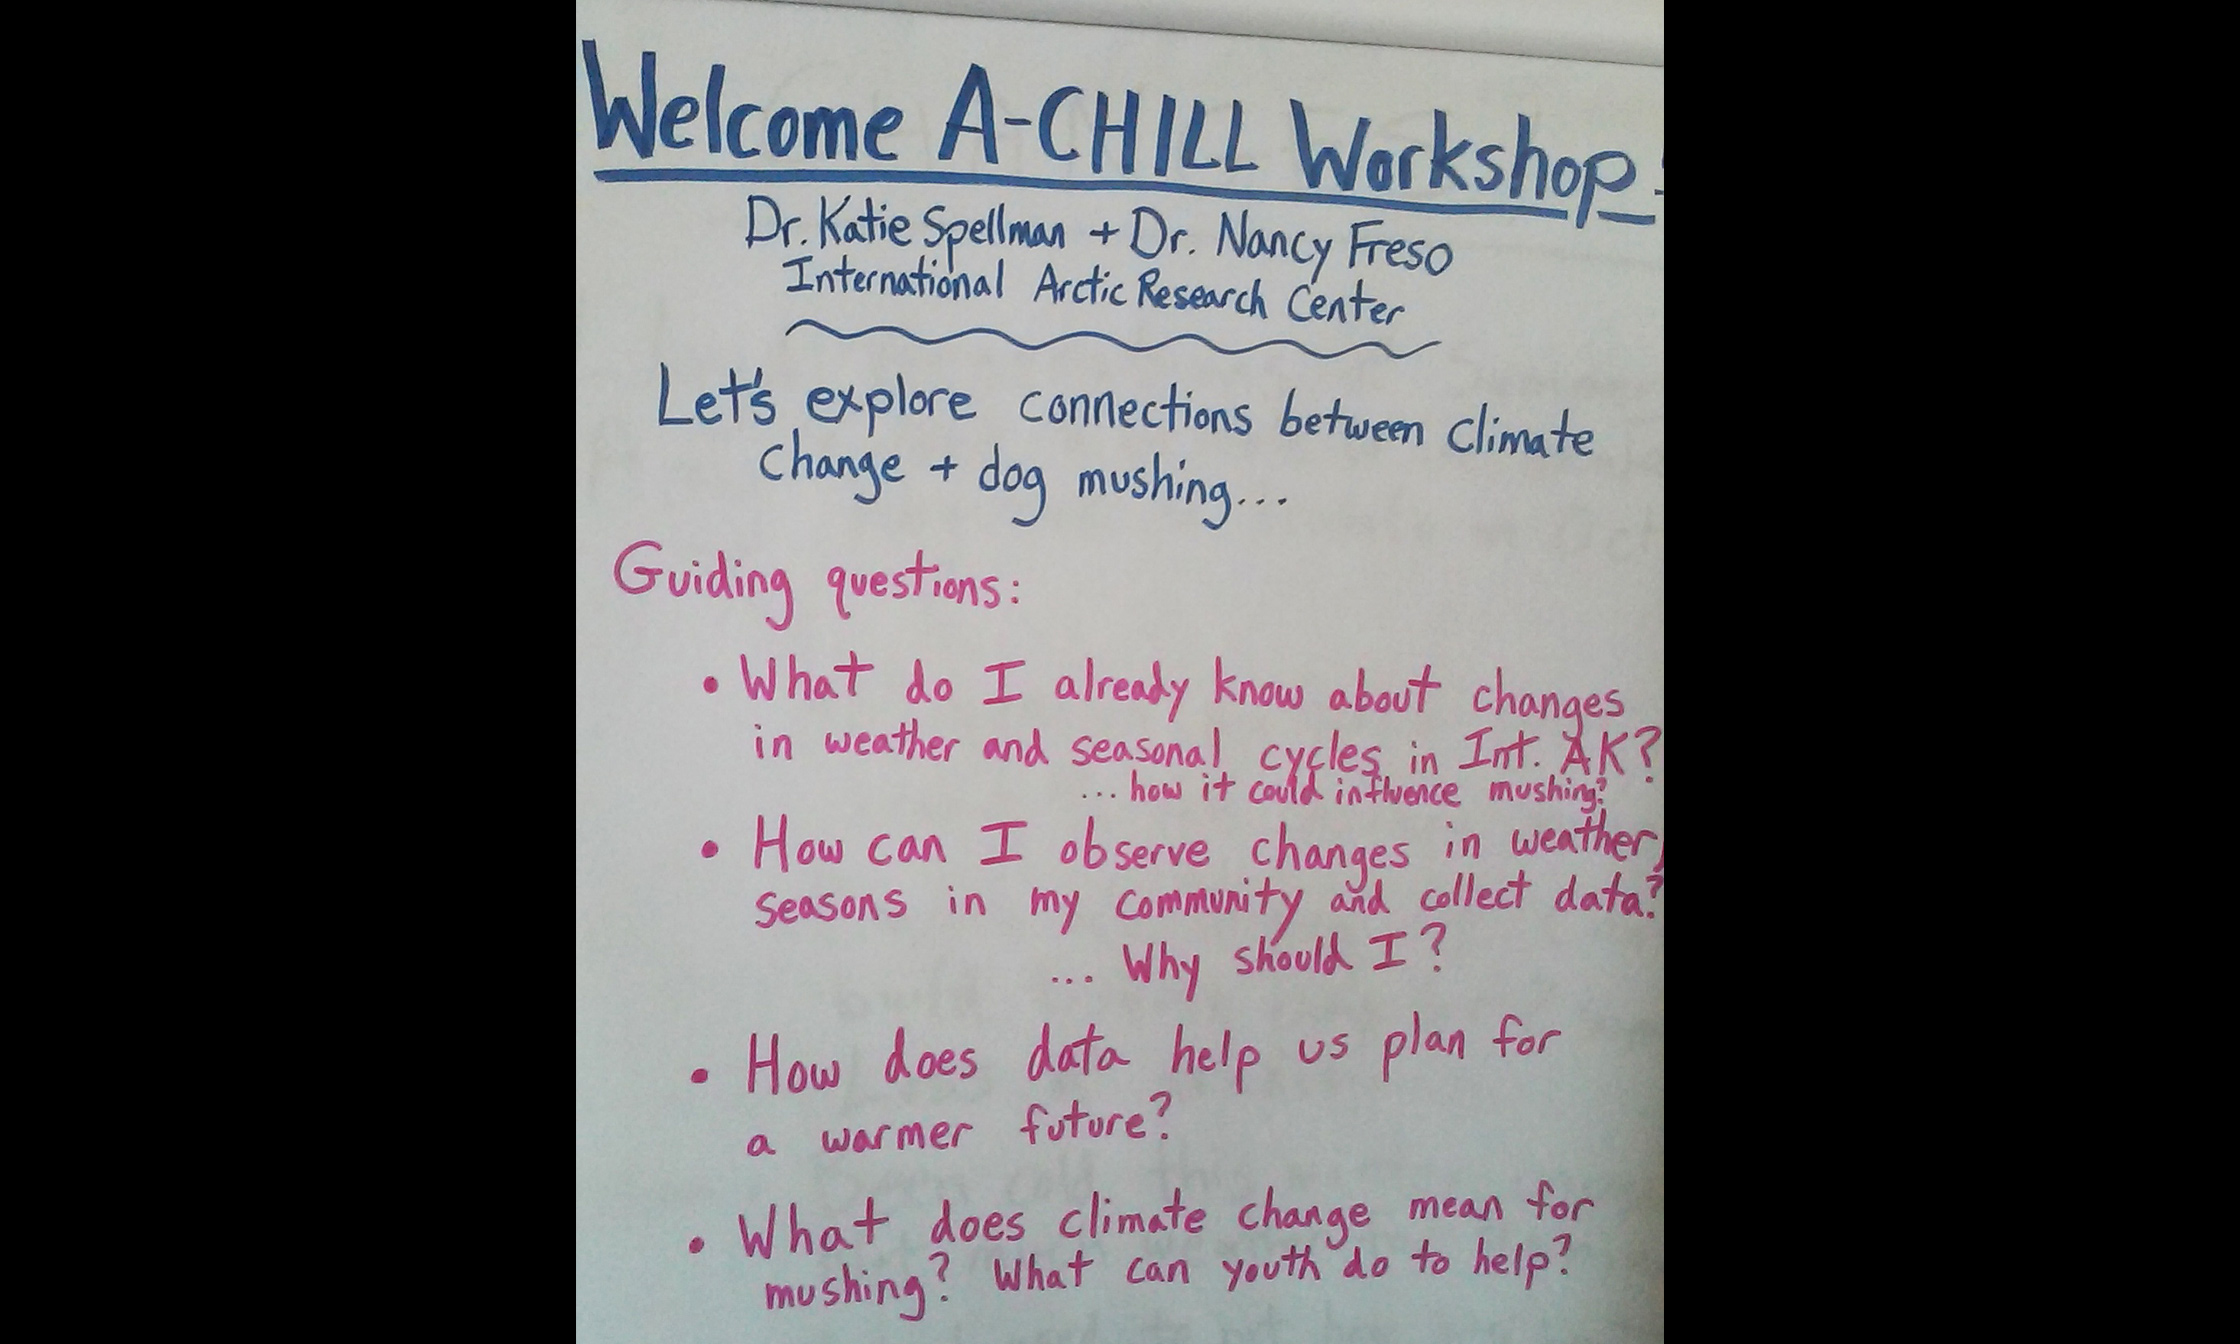 Guiding questions on climate changes